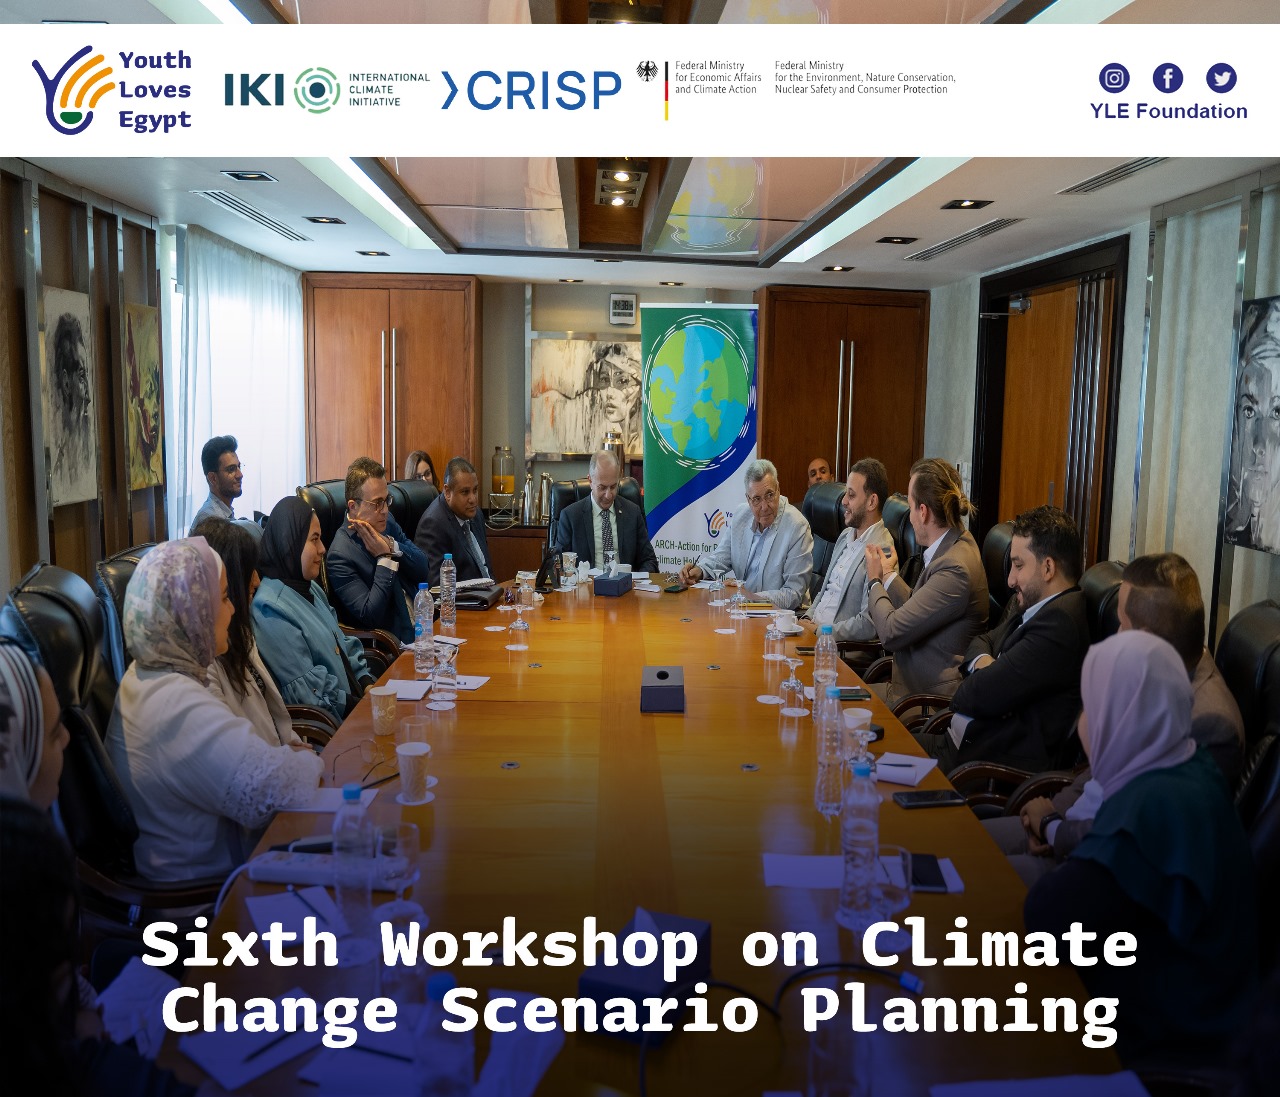 The sixth workshop on climate change scenario planning